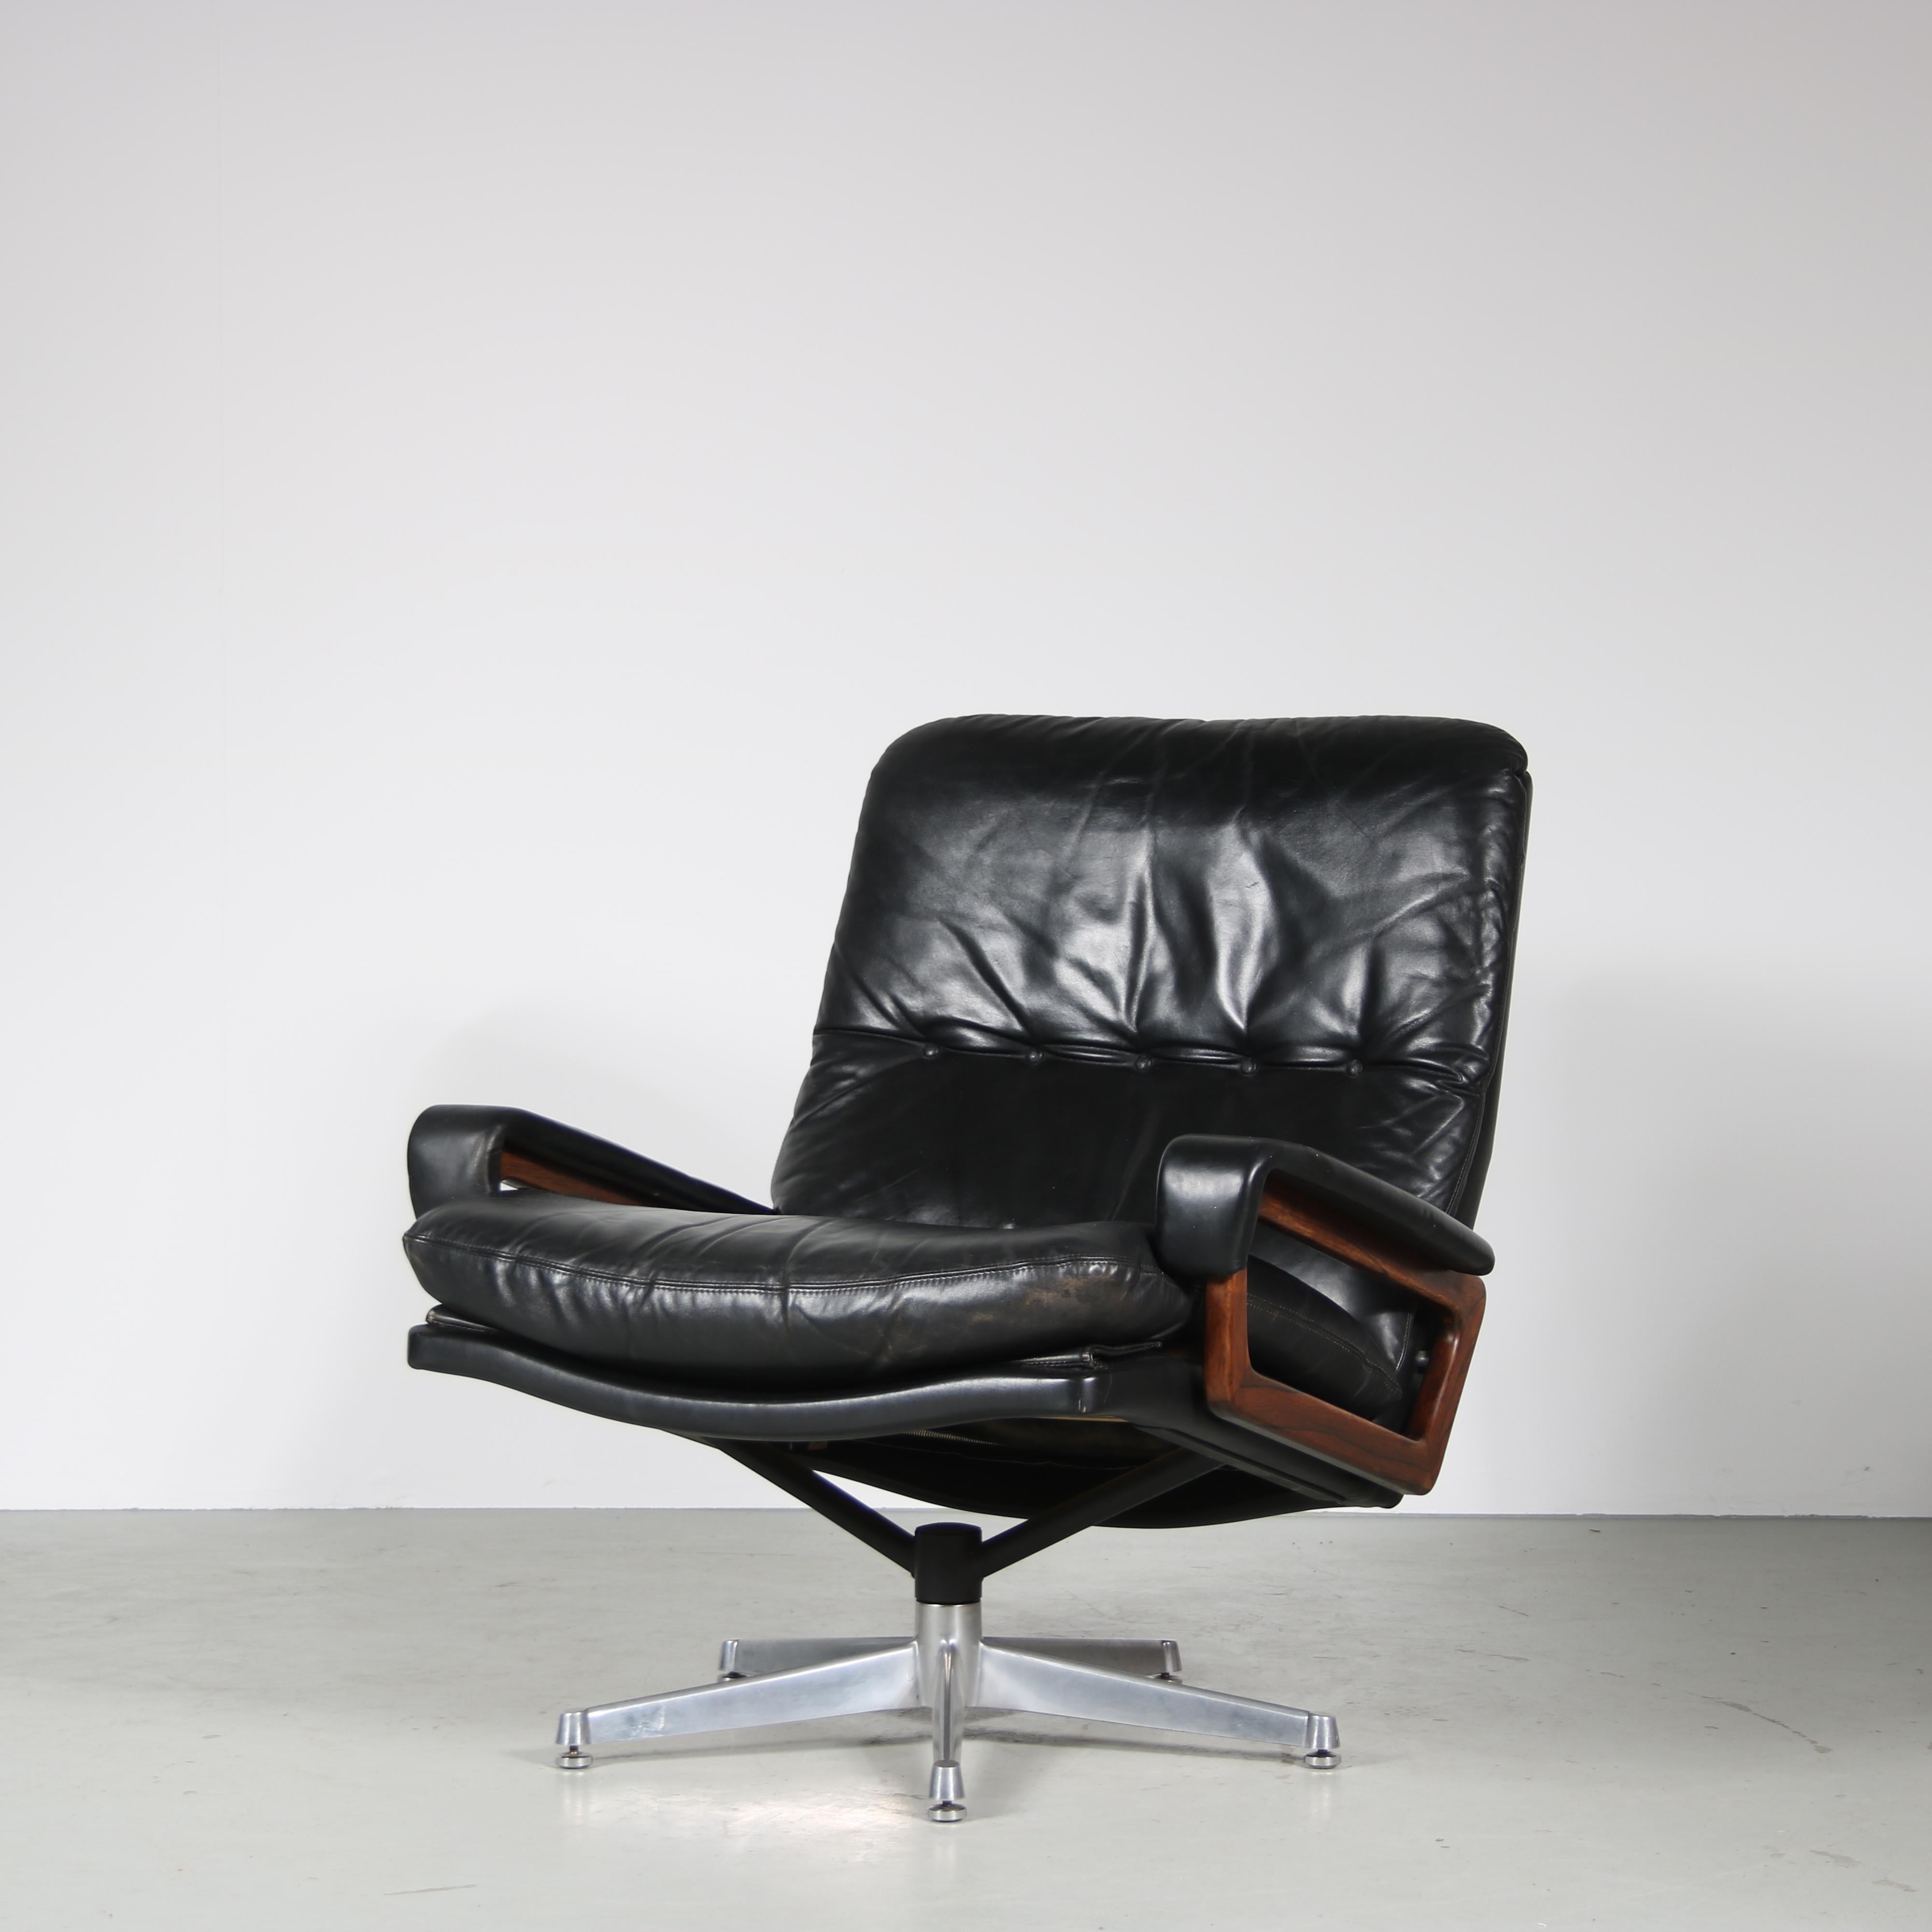 The “King” lounge chair is an impressive piece of vintage design designed by André Vandenbeuck, manufactured by Strässle in Switzerland around 1960.

It has a chrome plated crossbase with swivel mechanism. The backwards tilted seat is upholstered in